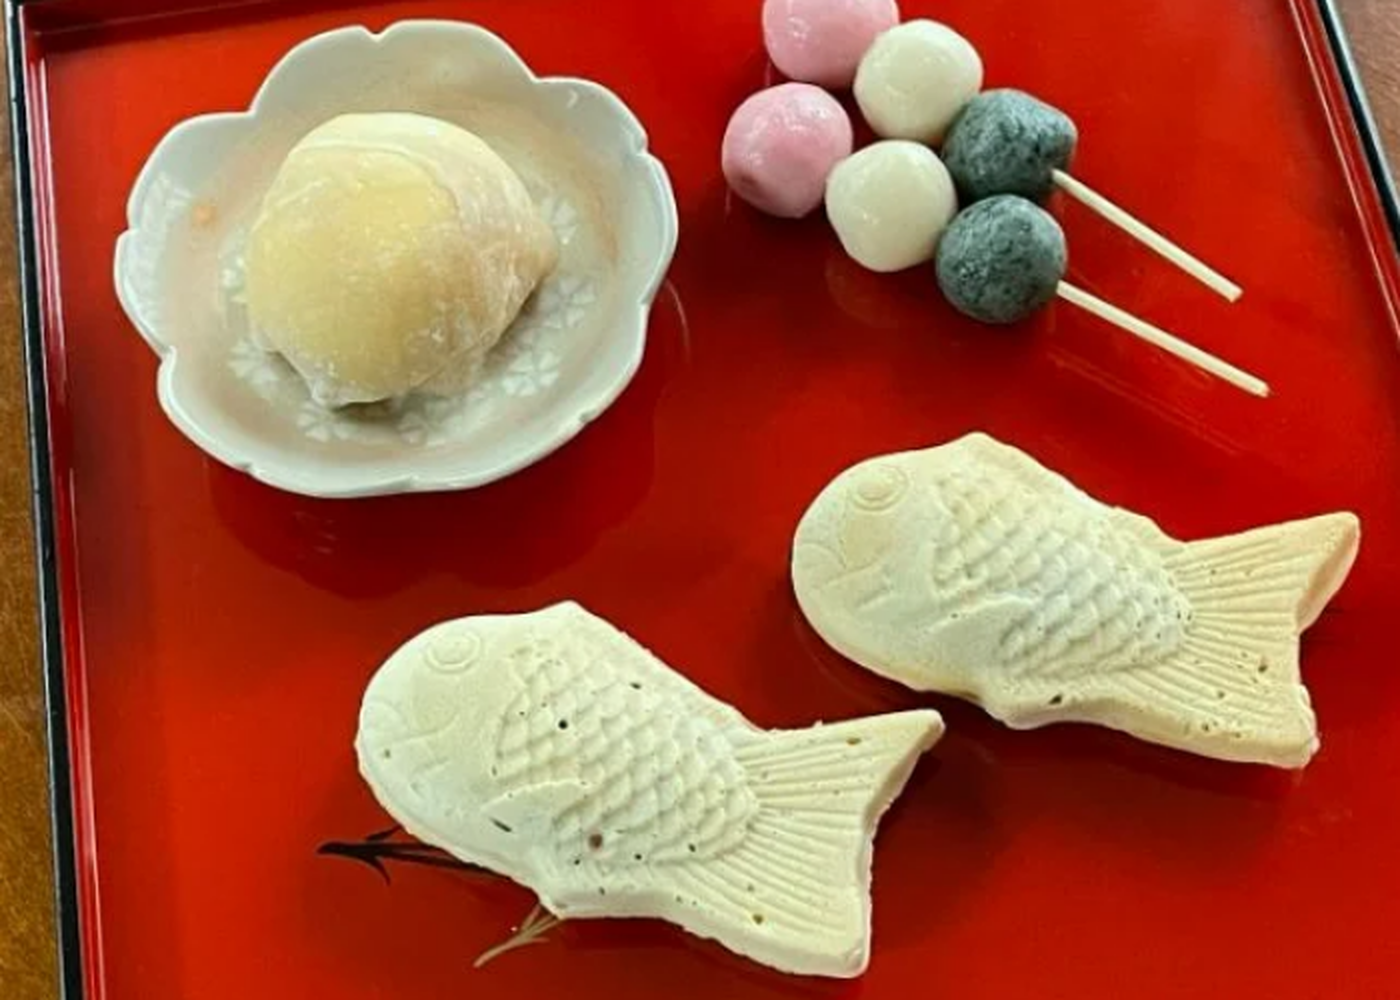 A red tray with a selection of Japanese sweets, including mochi, taiyaki, and dango.